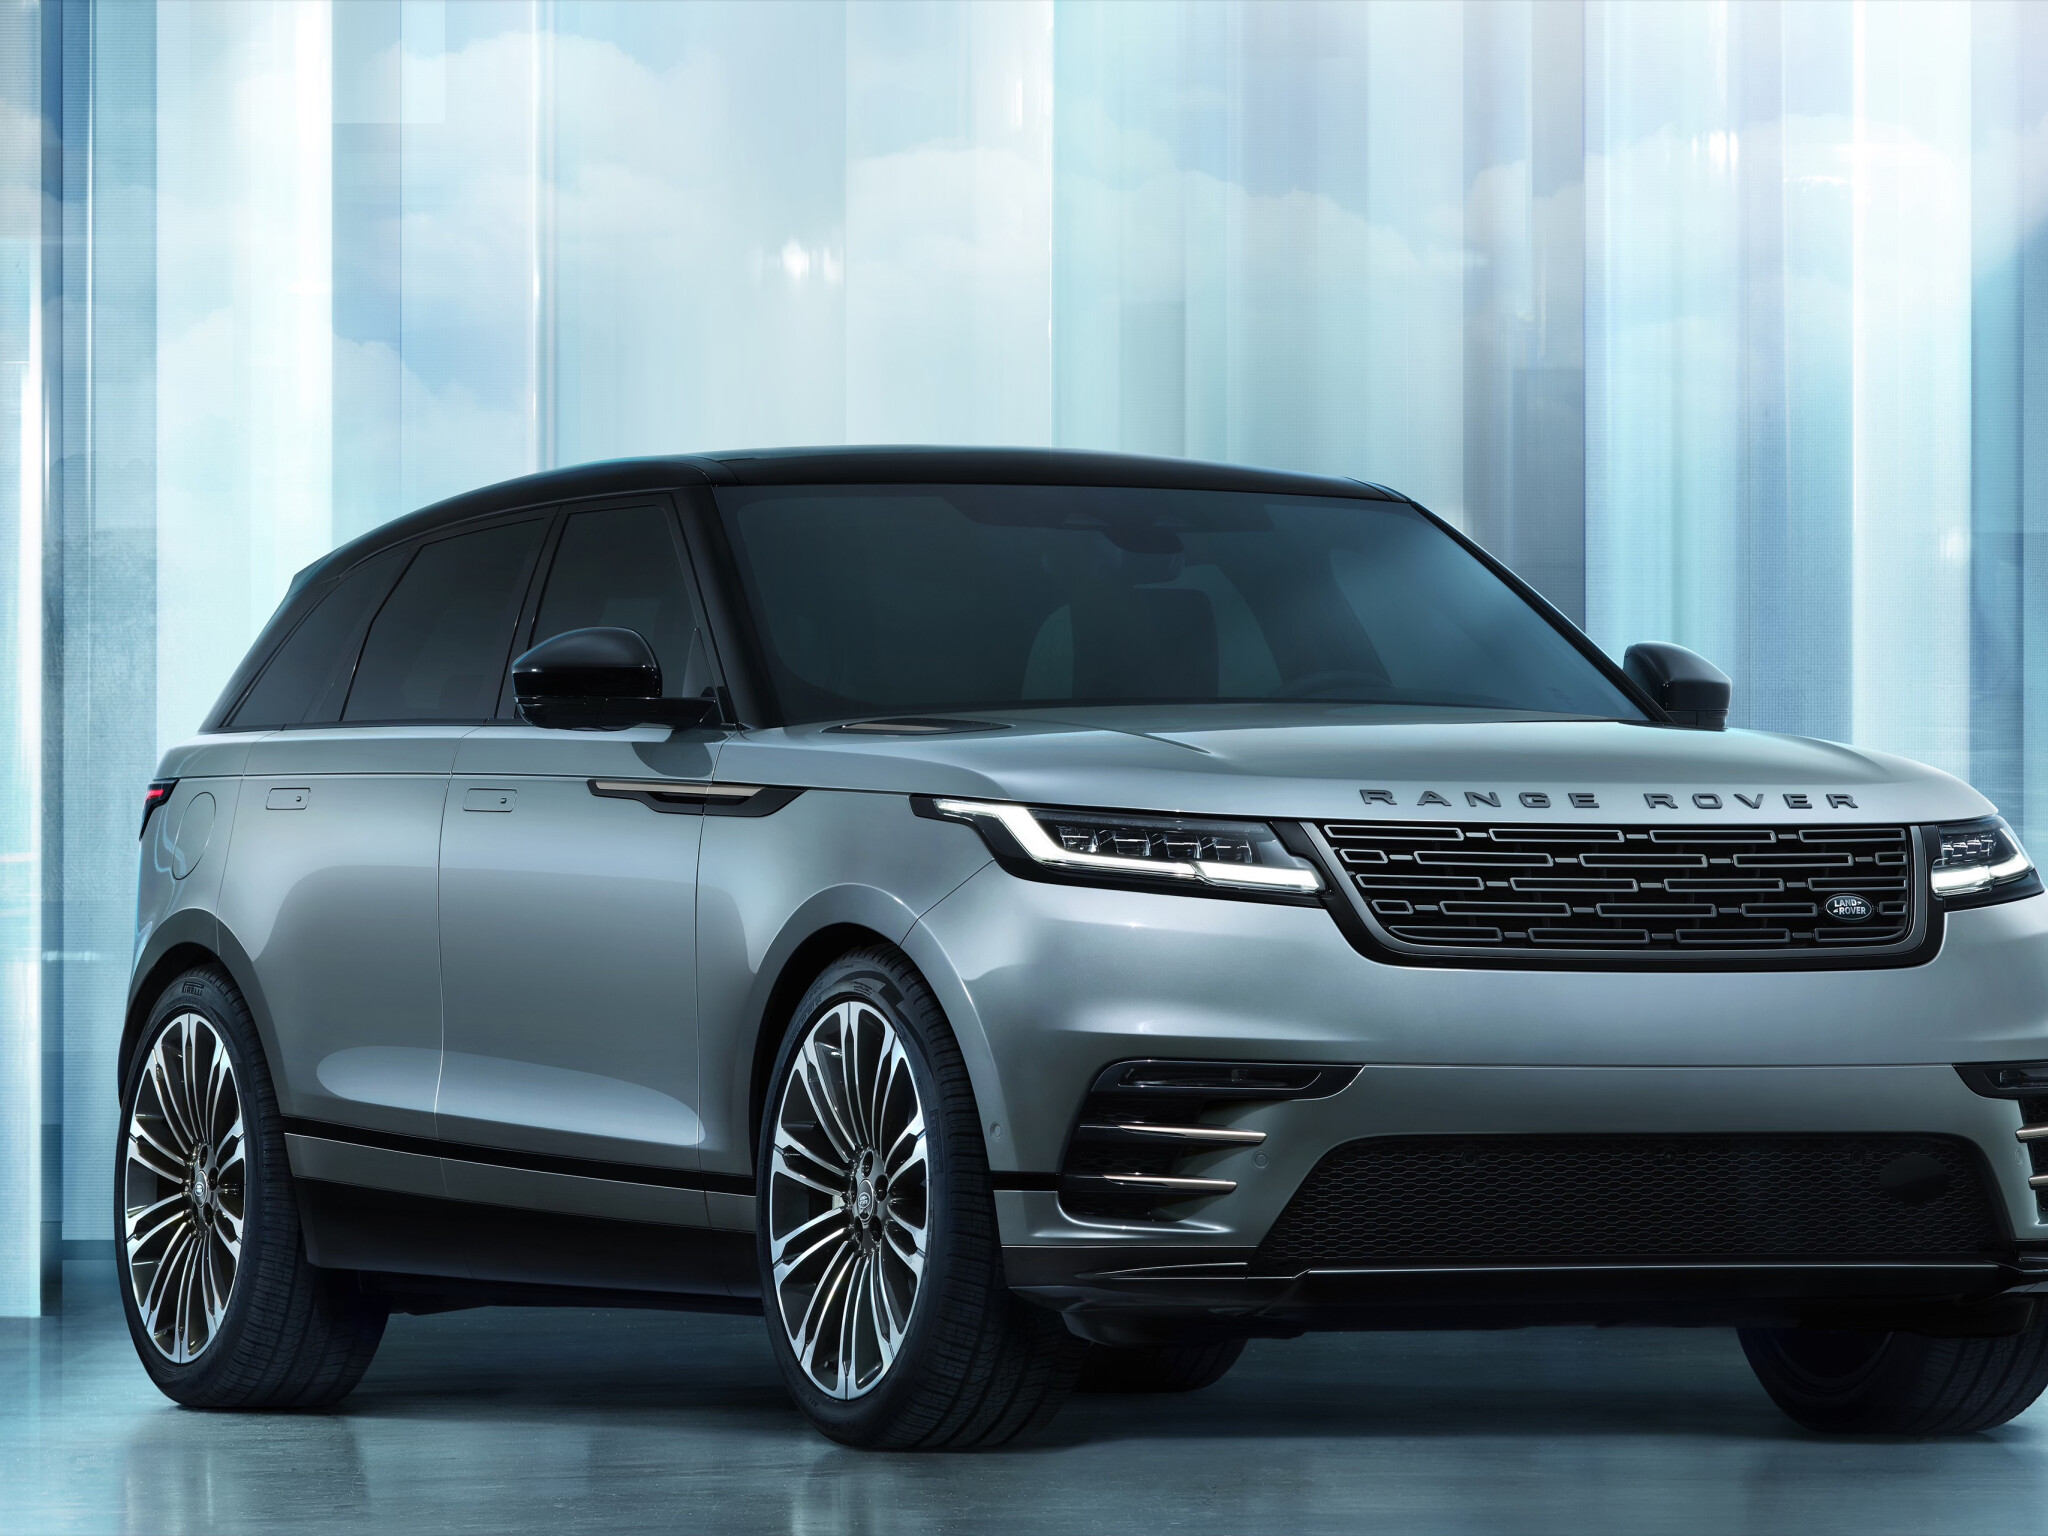 Land-Rover Range Rover Velar dimensions, boot space and